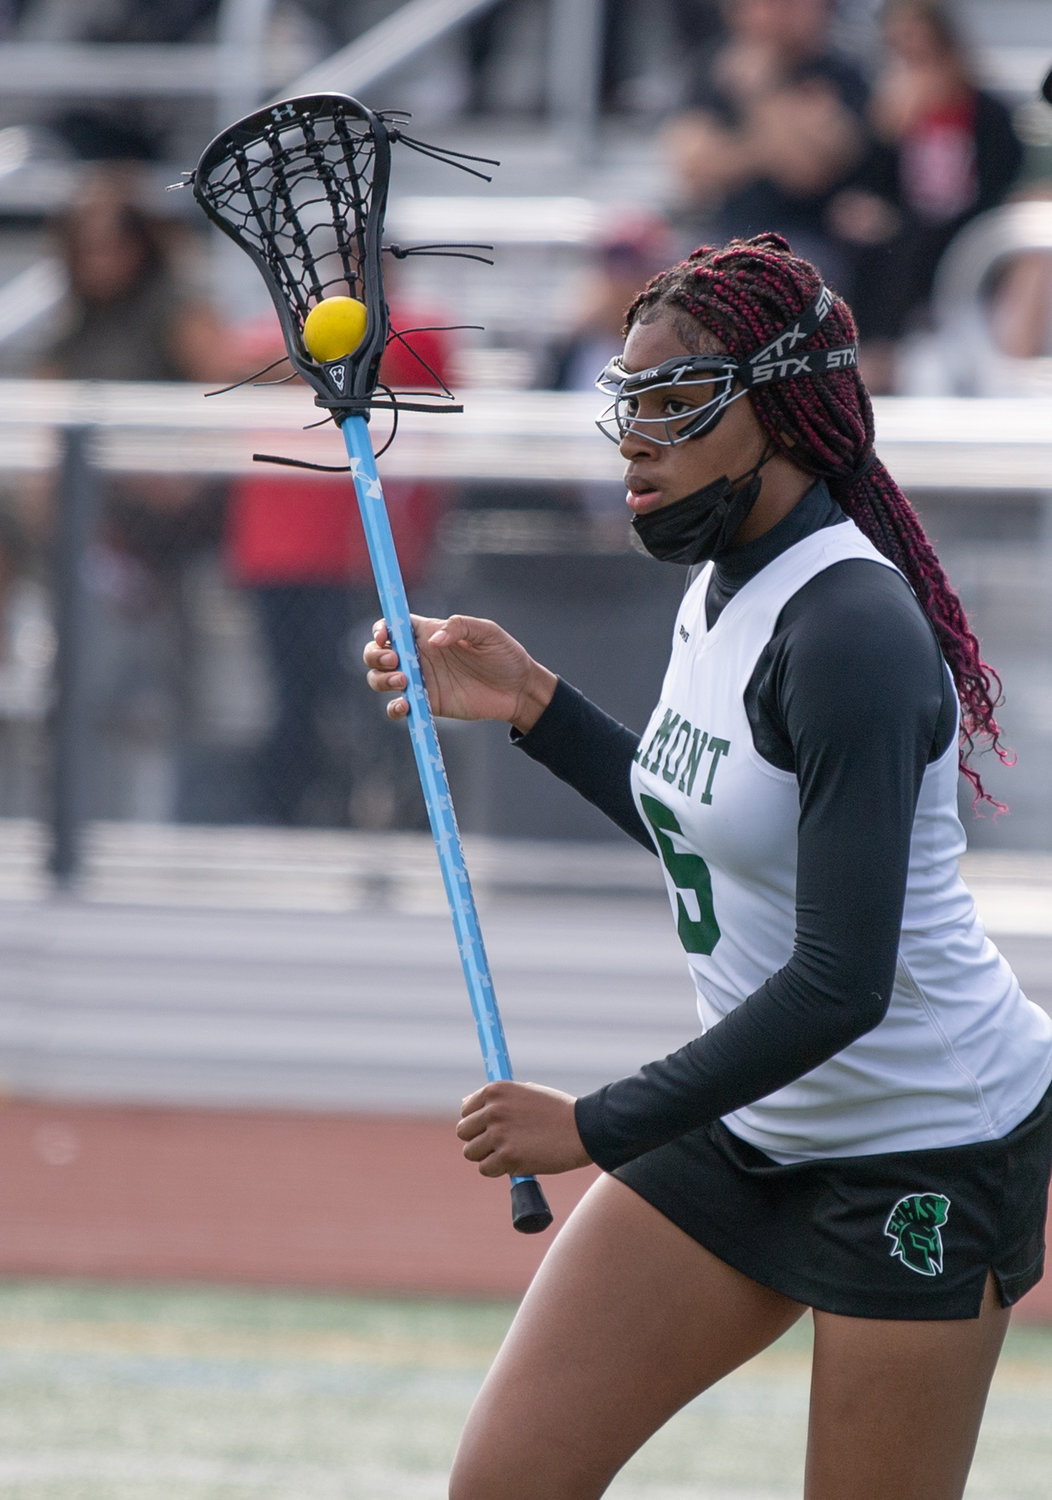 Junior midfielder Anaise Novembre posted a hat trick in Elmont’s victories over Sewanhaka and Valley Stream District.